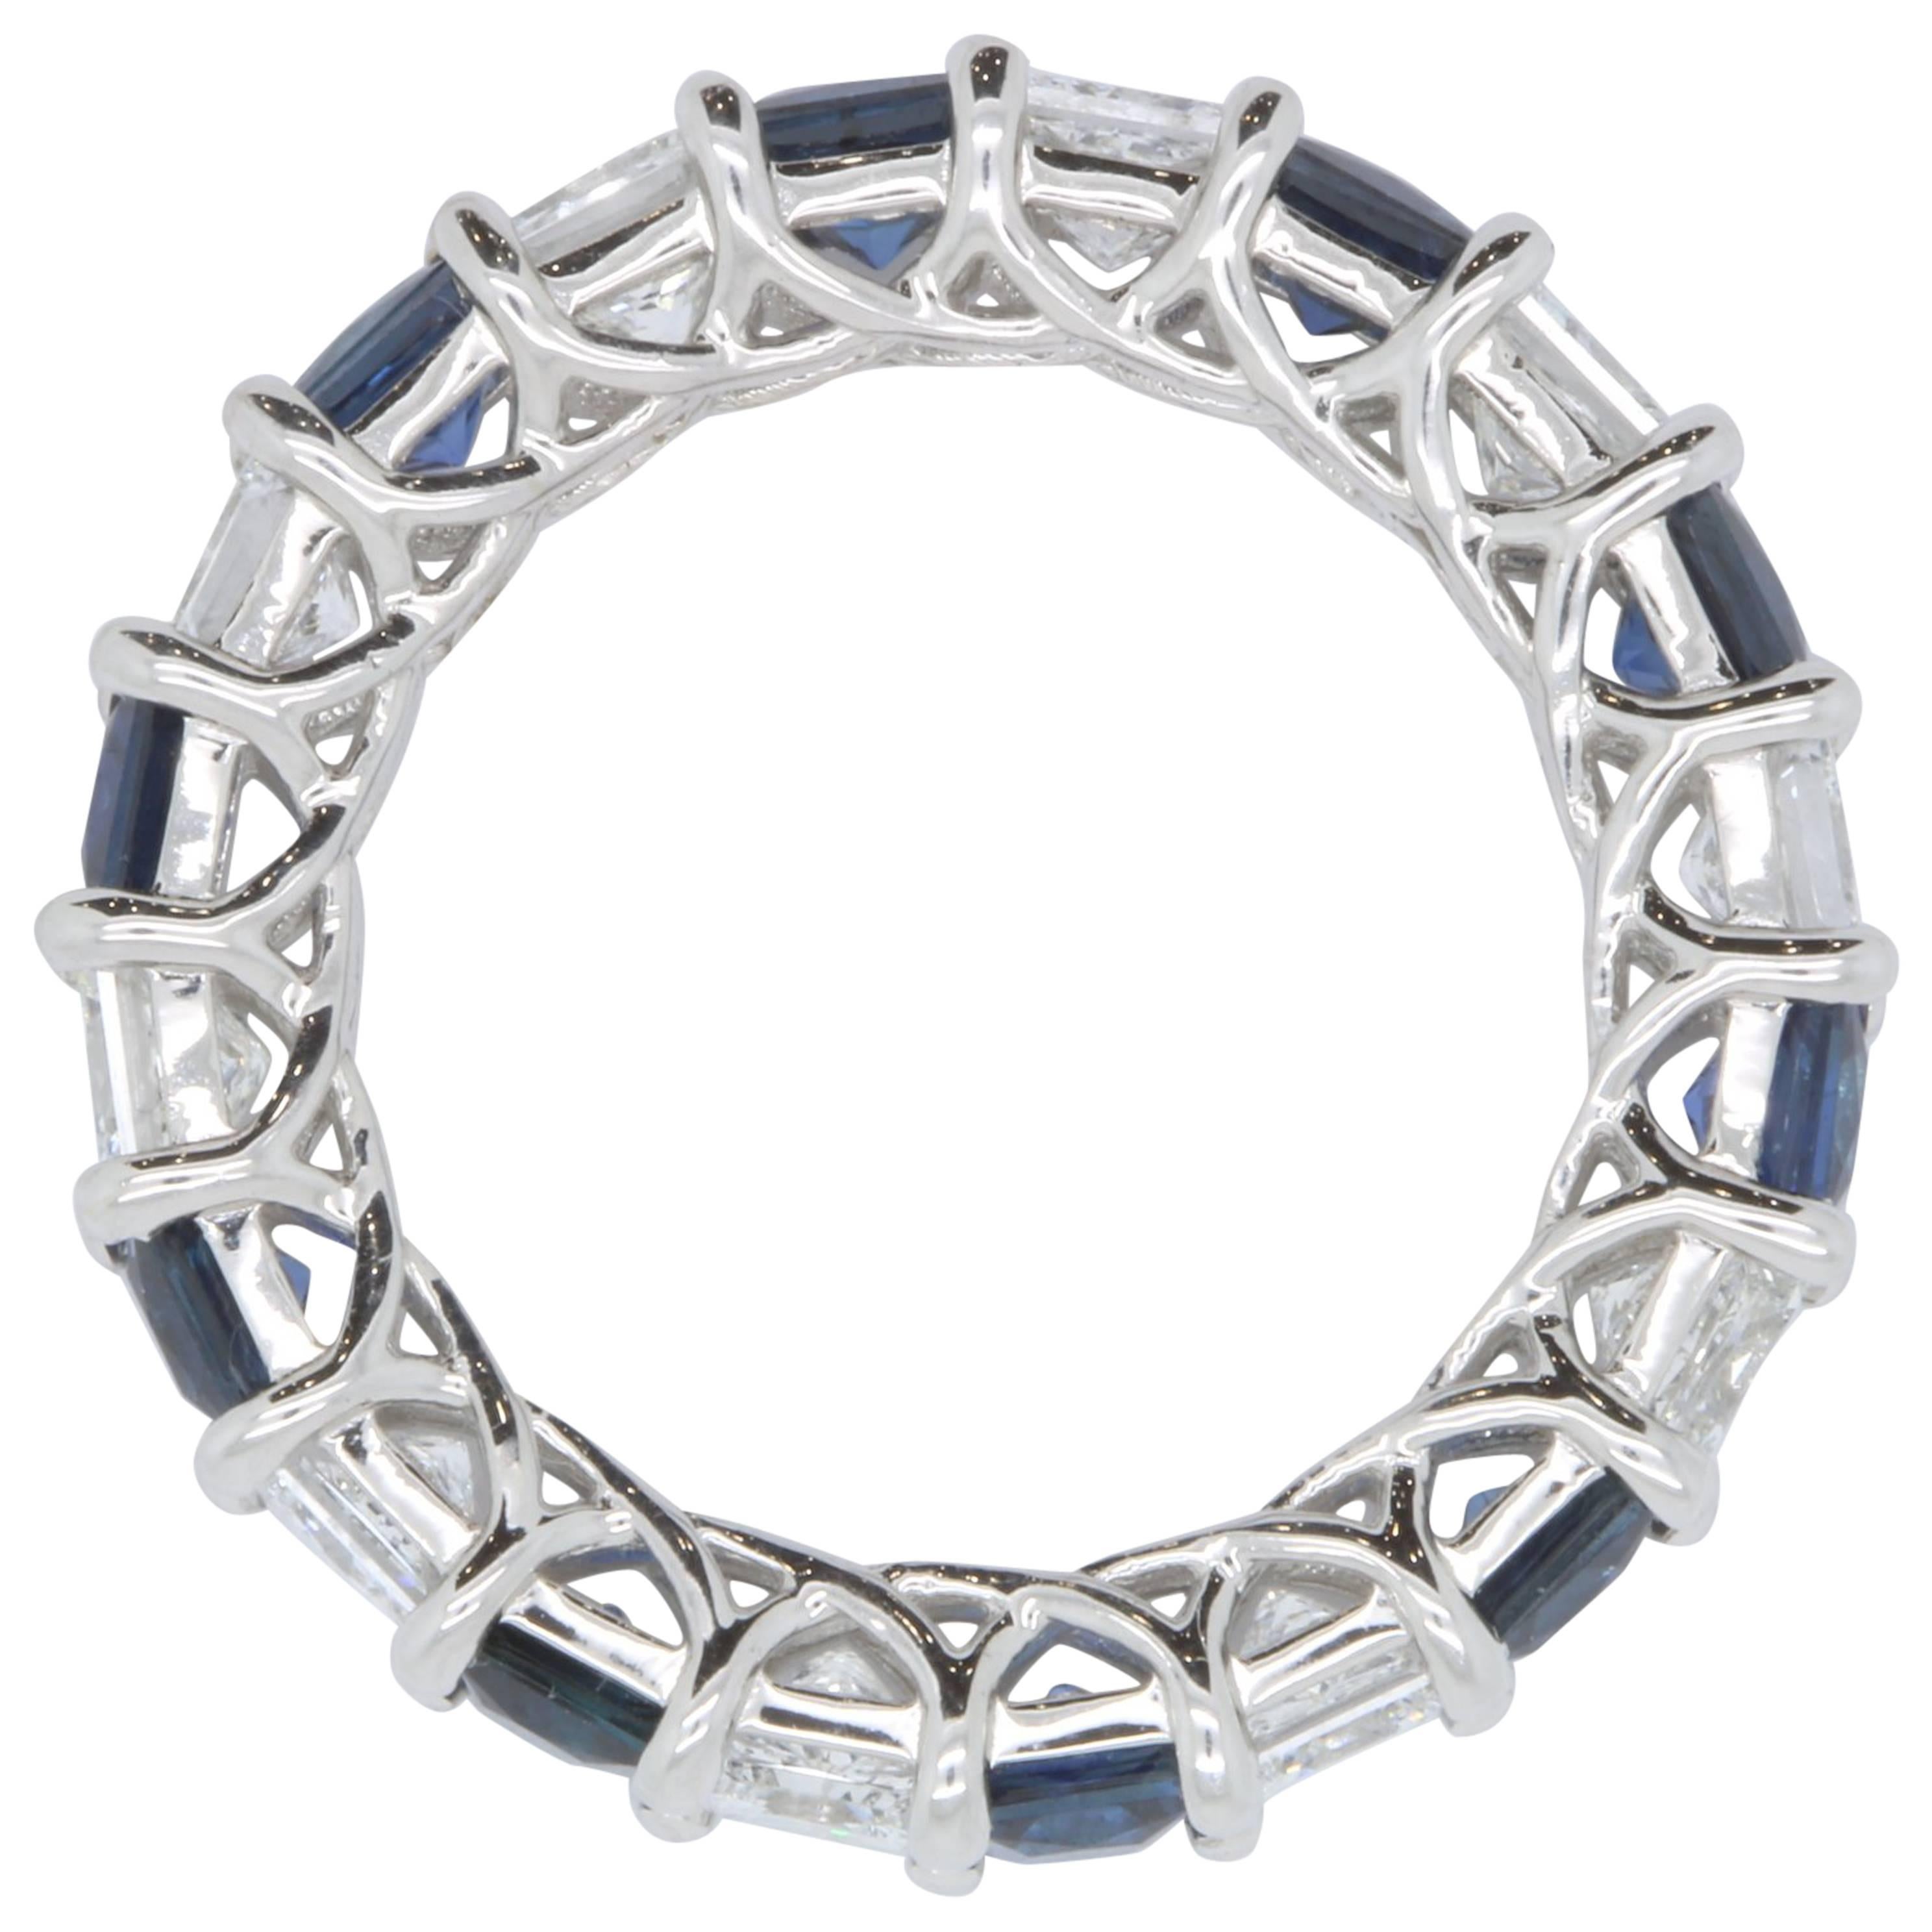 Material: 18k White Gold
Gemstone: 10 Princess Cut Blue Sapphires at 2.73 Carats 
Diamond:  10 Princess Cut Diamonds at 2.34 Carats - VS Clarity / G-H Color
Ring Size: Size 5.5 - This ring can be remade in your size. Price may vary depending on